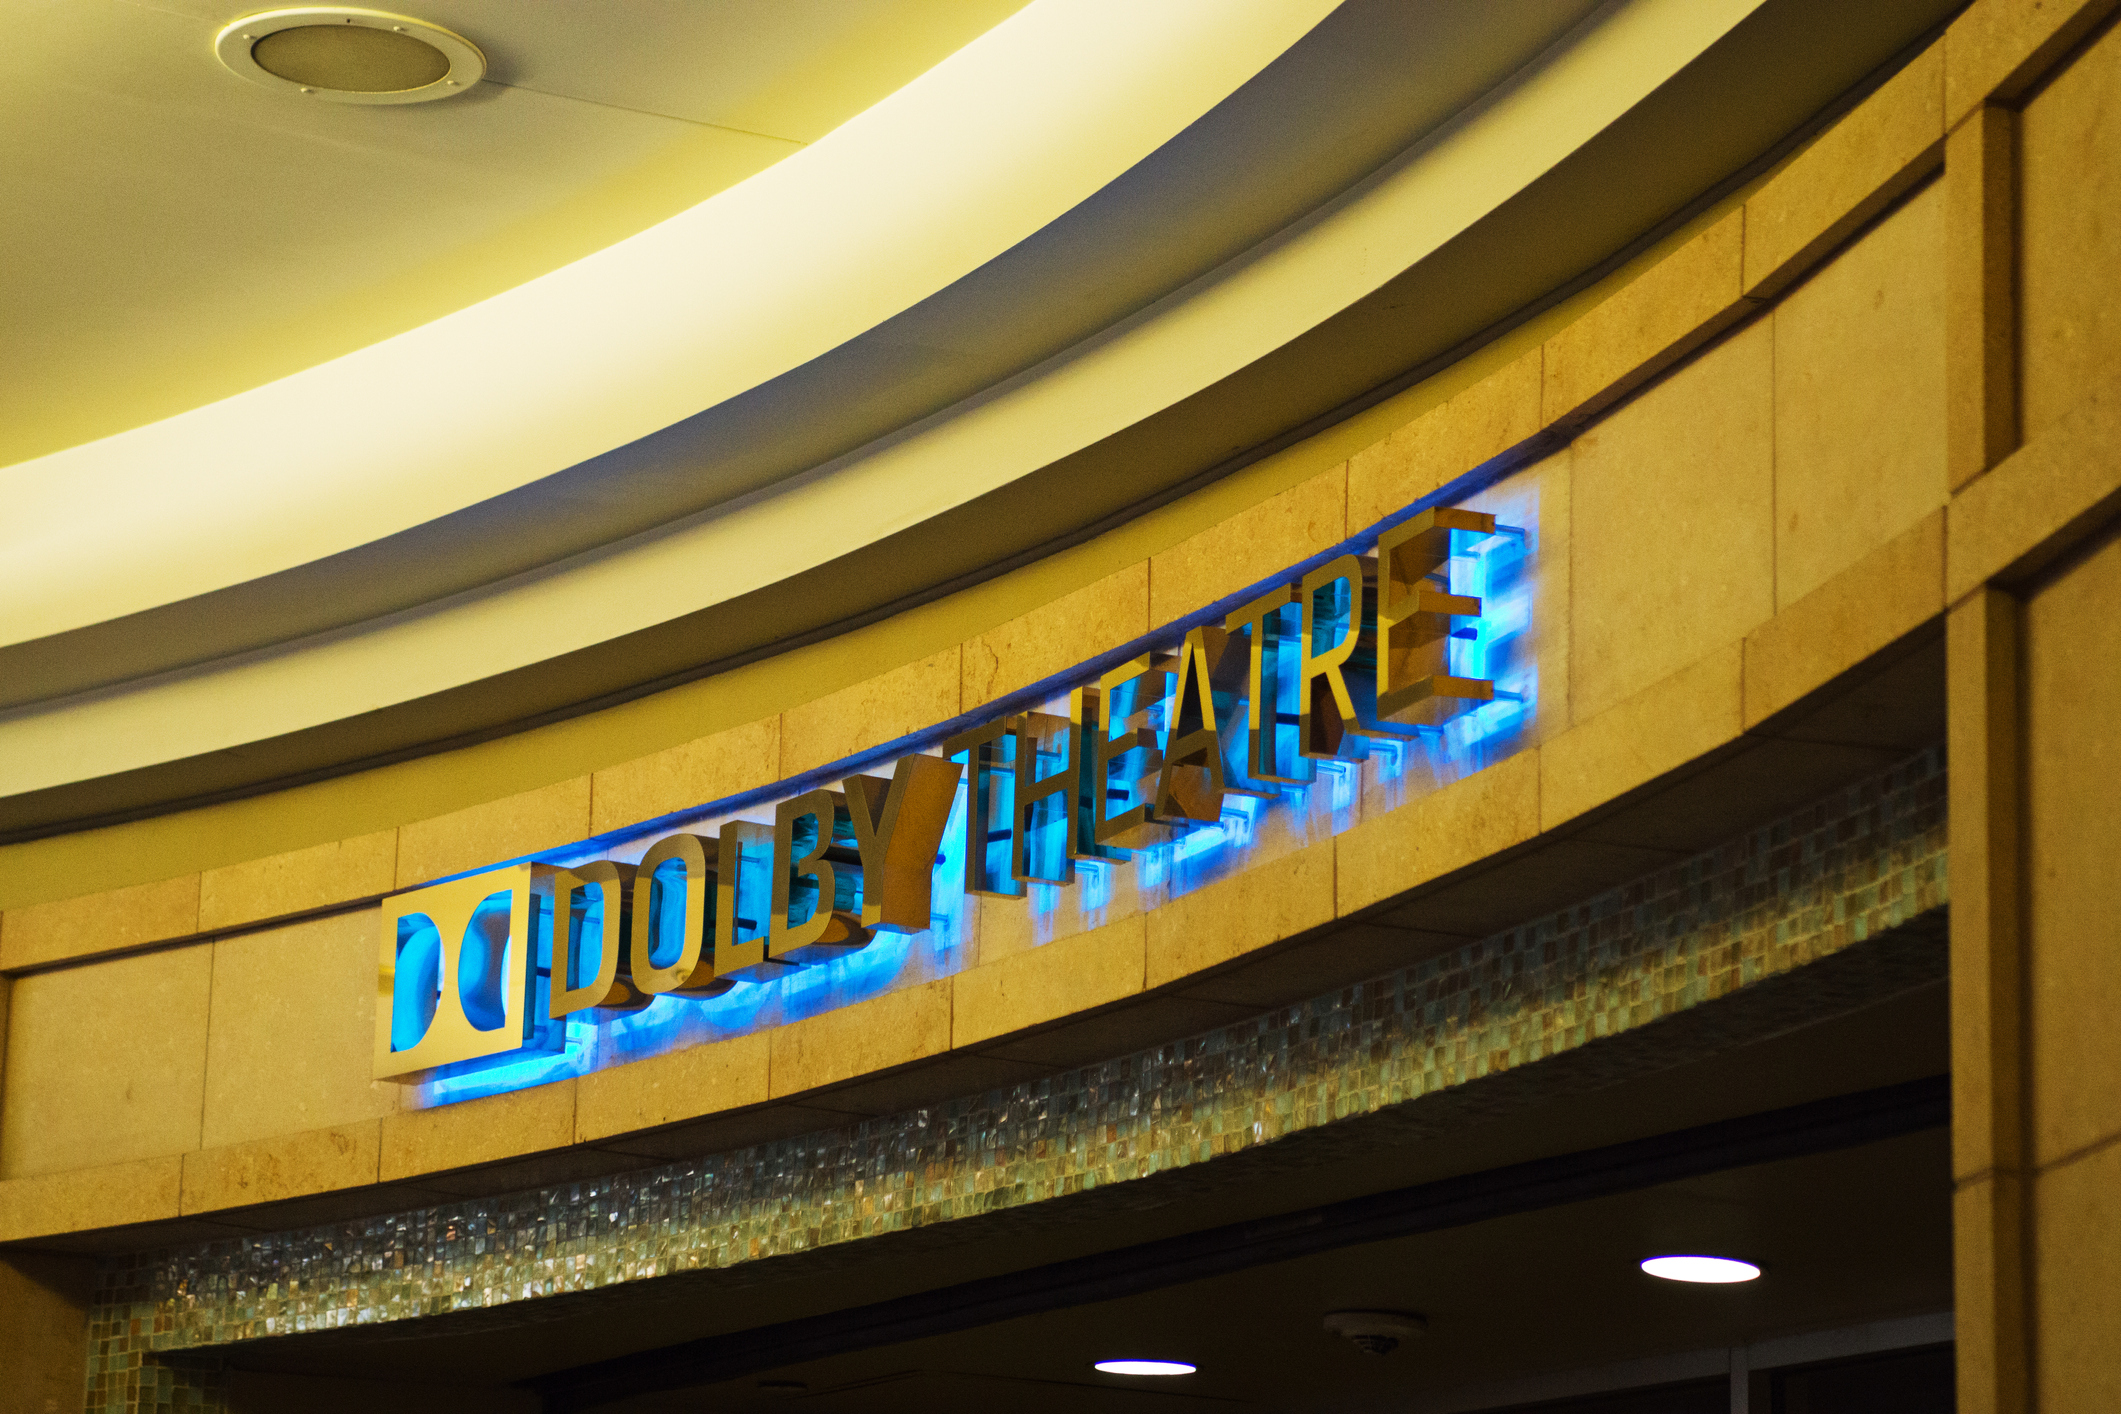 Dolby Theatre Hollywood